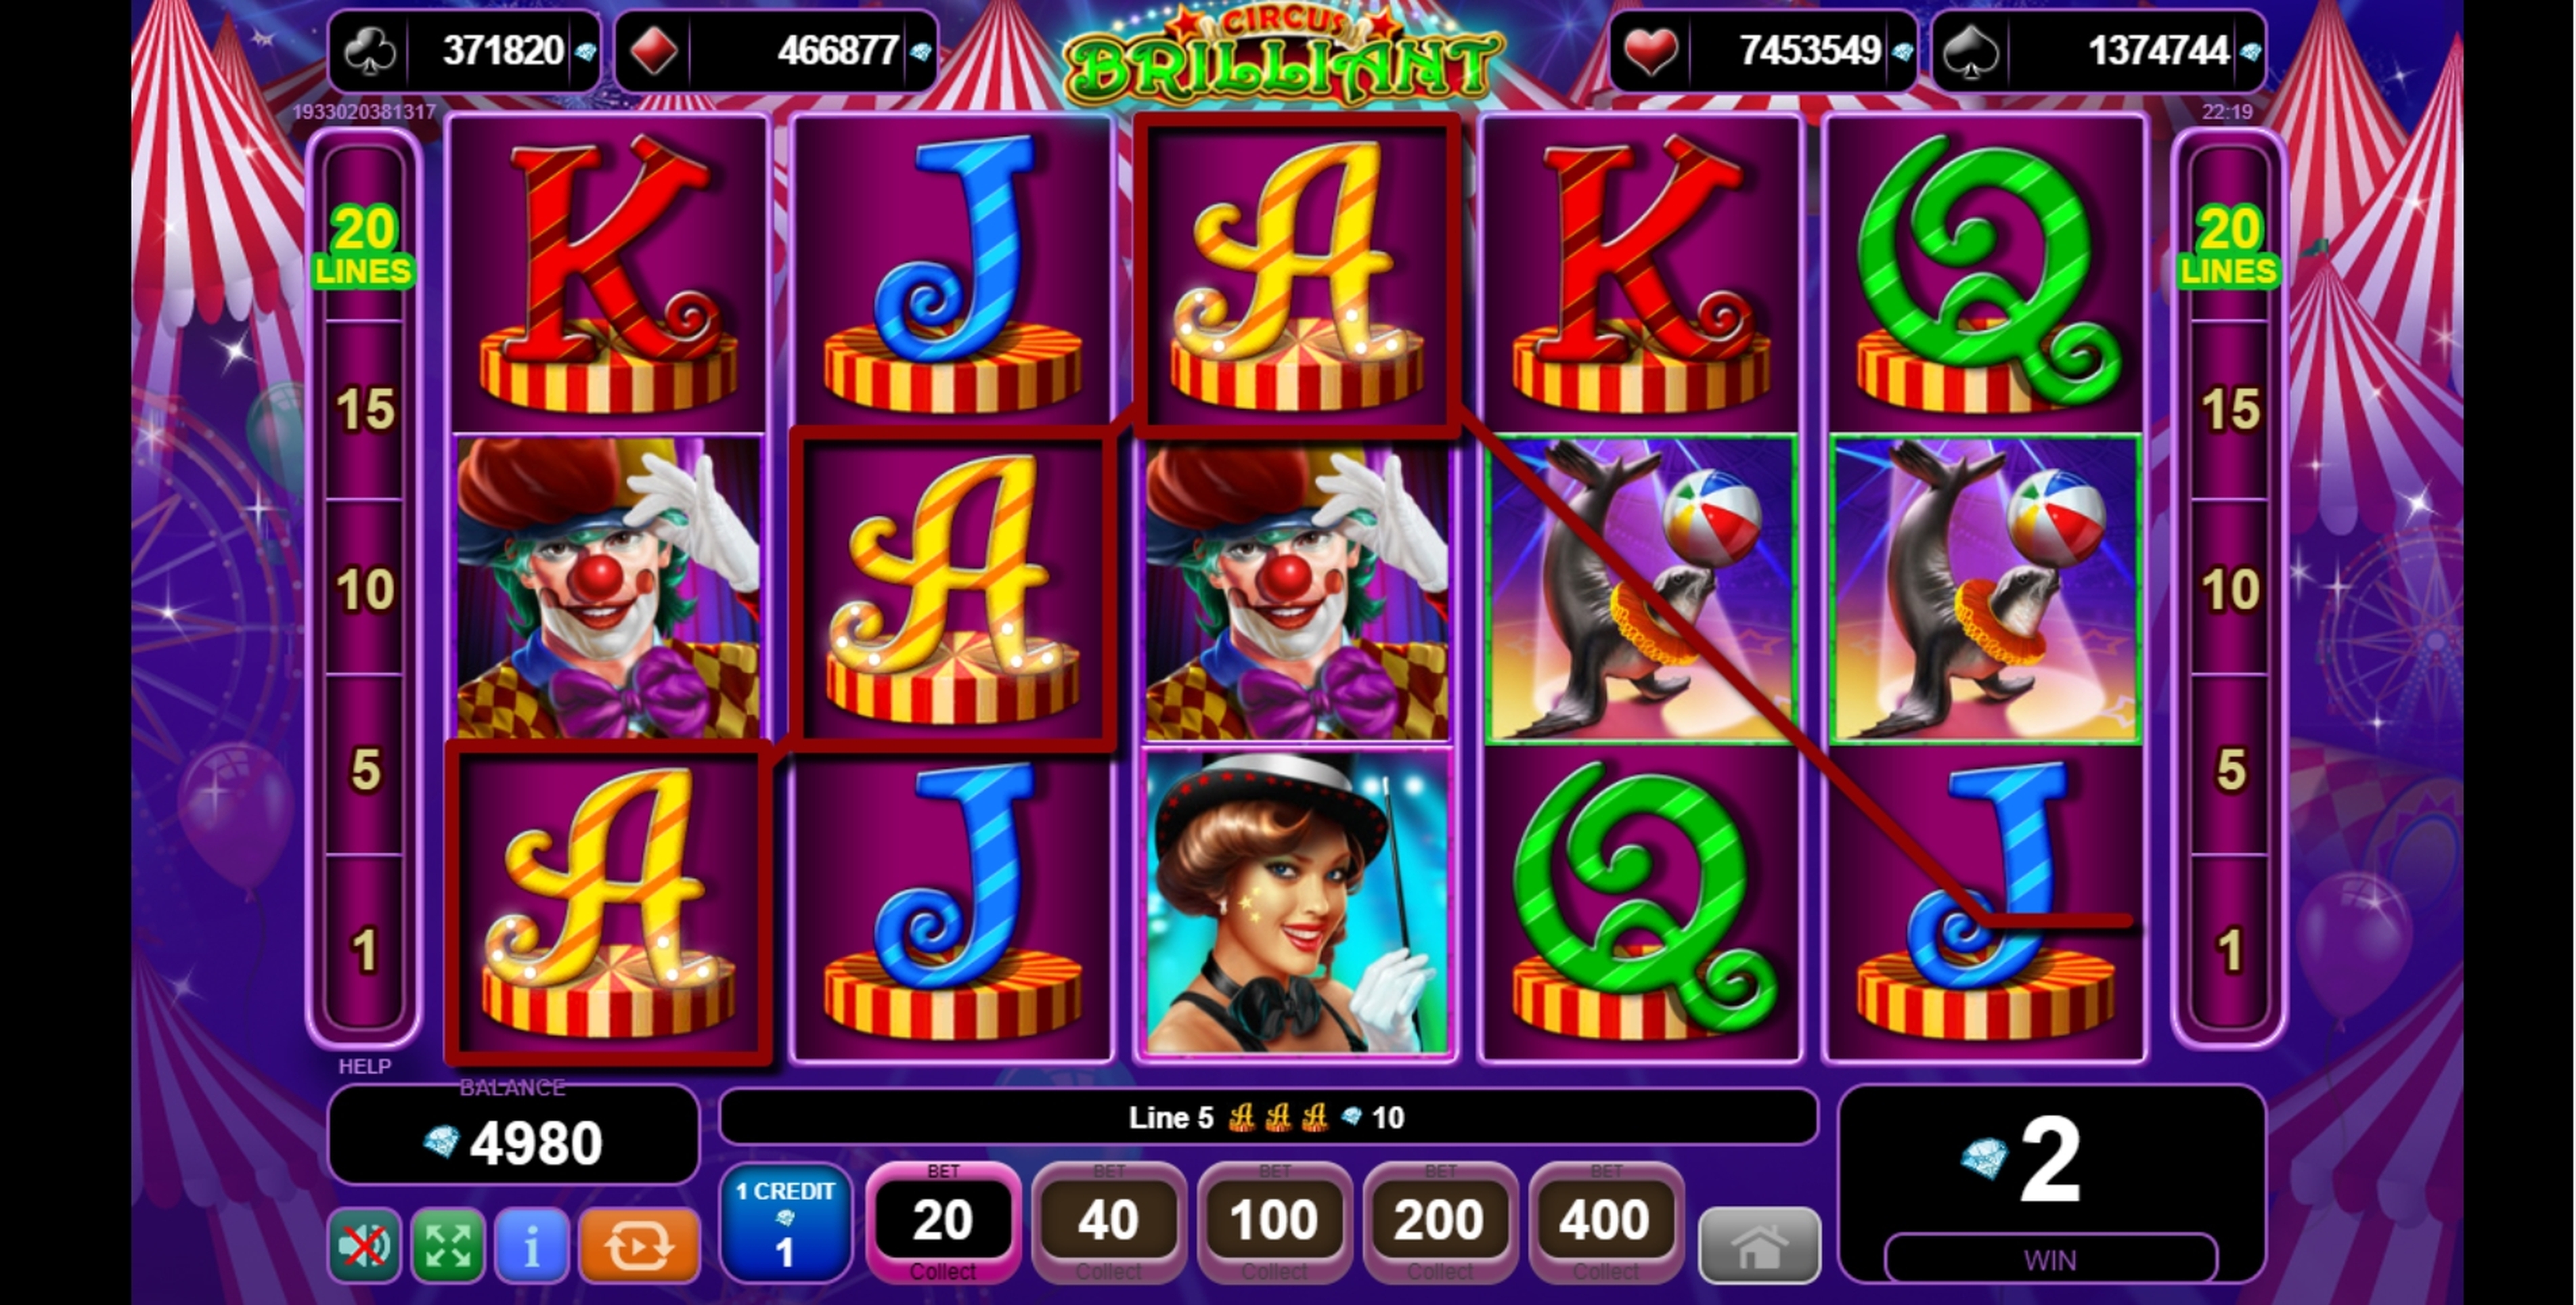 Win Money in Circus Brilliant Free Slot Game by EGT